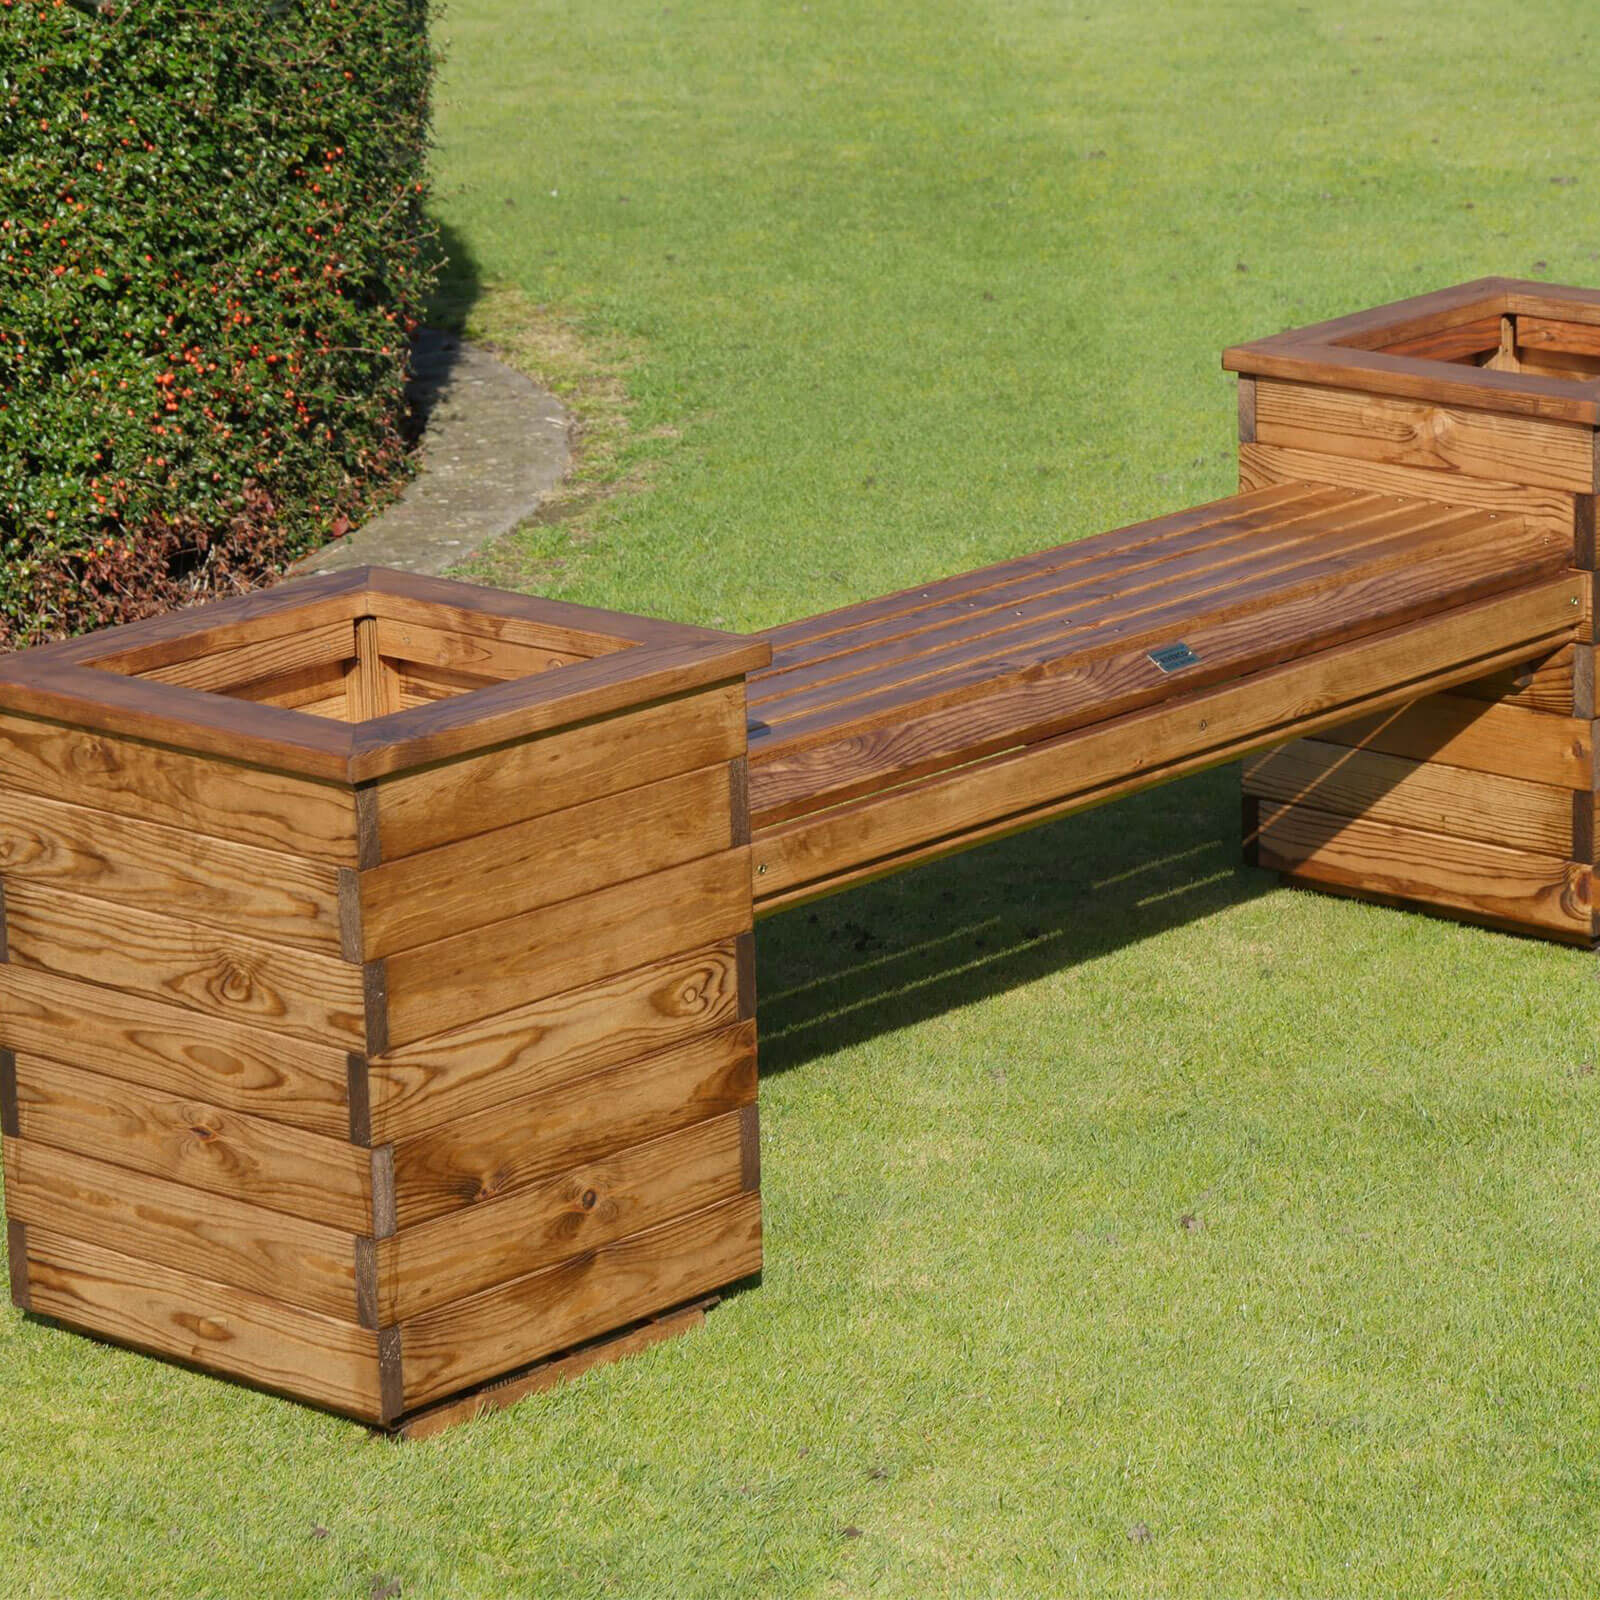 Scandinavian redwood bench with 2 plant pots at either side of bench, for garden or patio living area